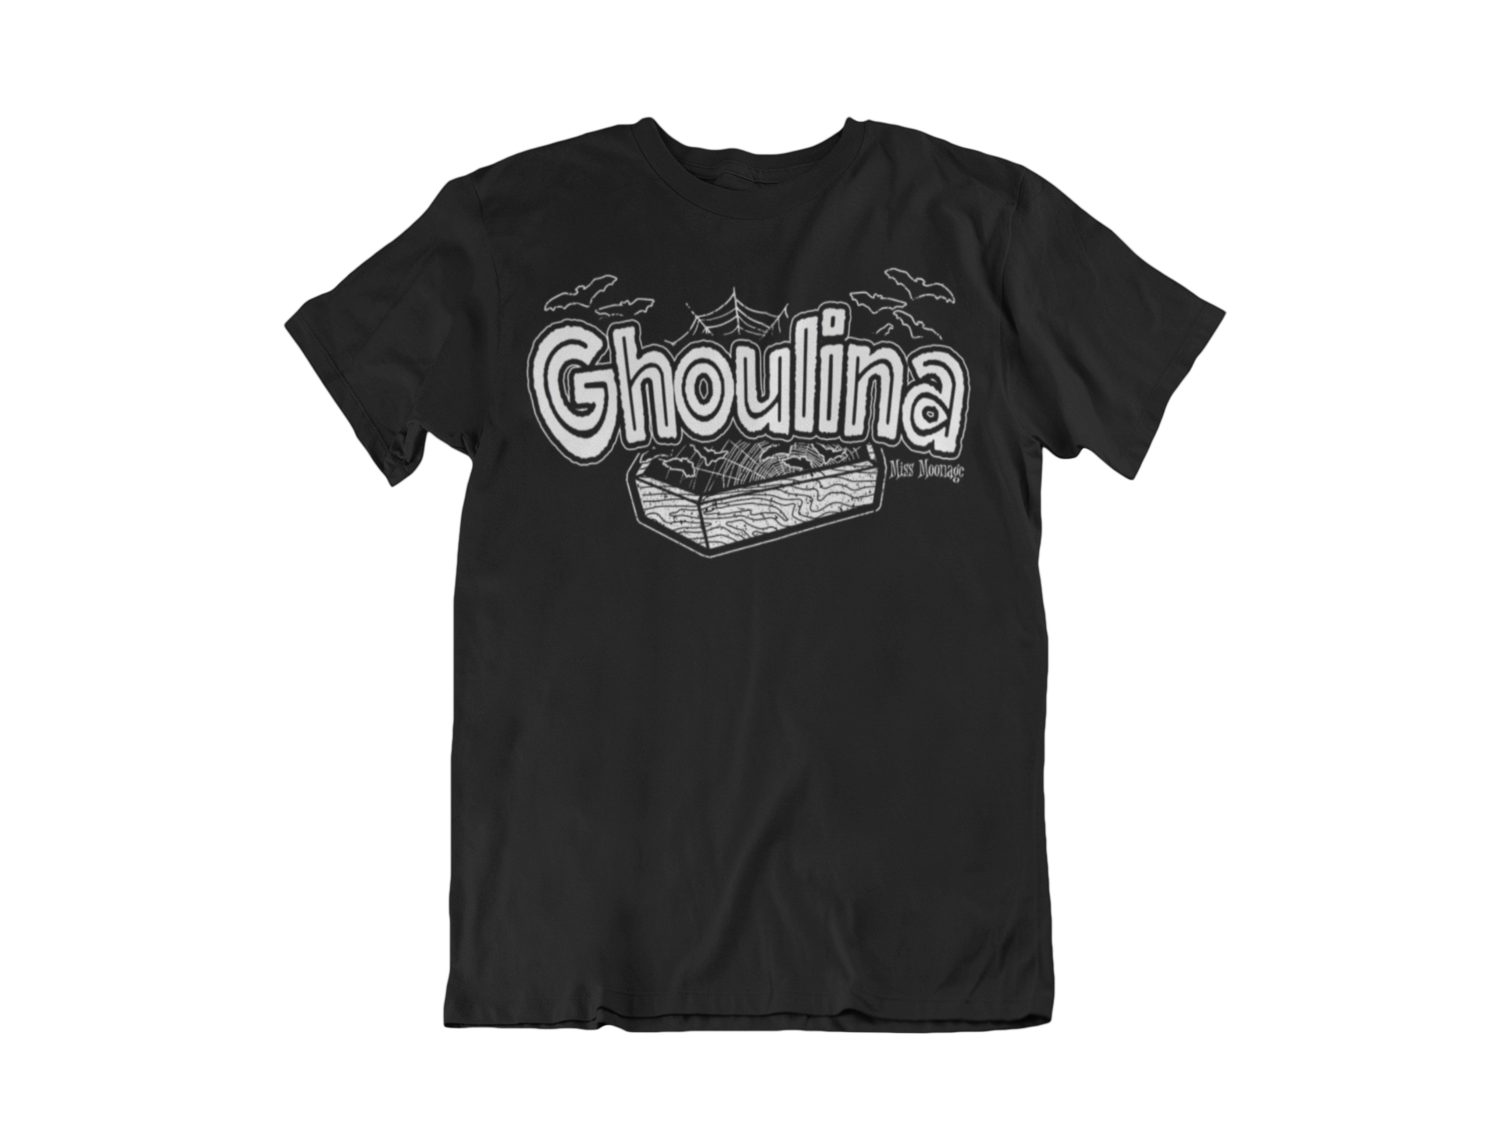 GHOULINA by MISS MOONAGE tshirt for MEN